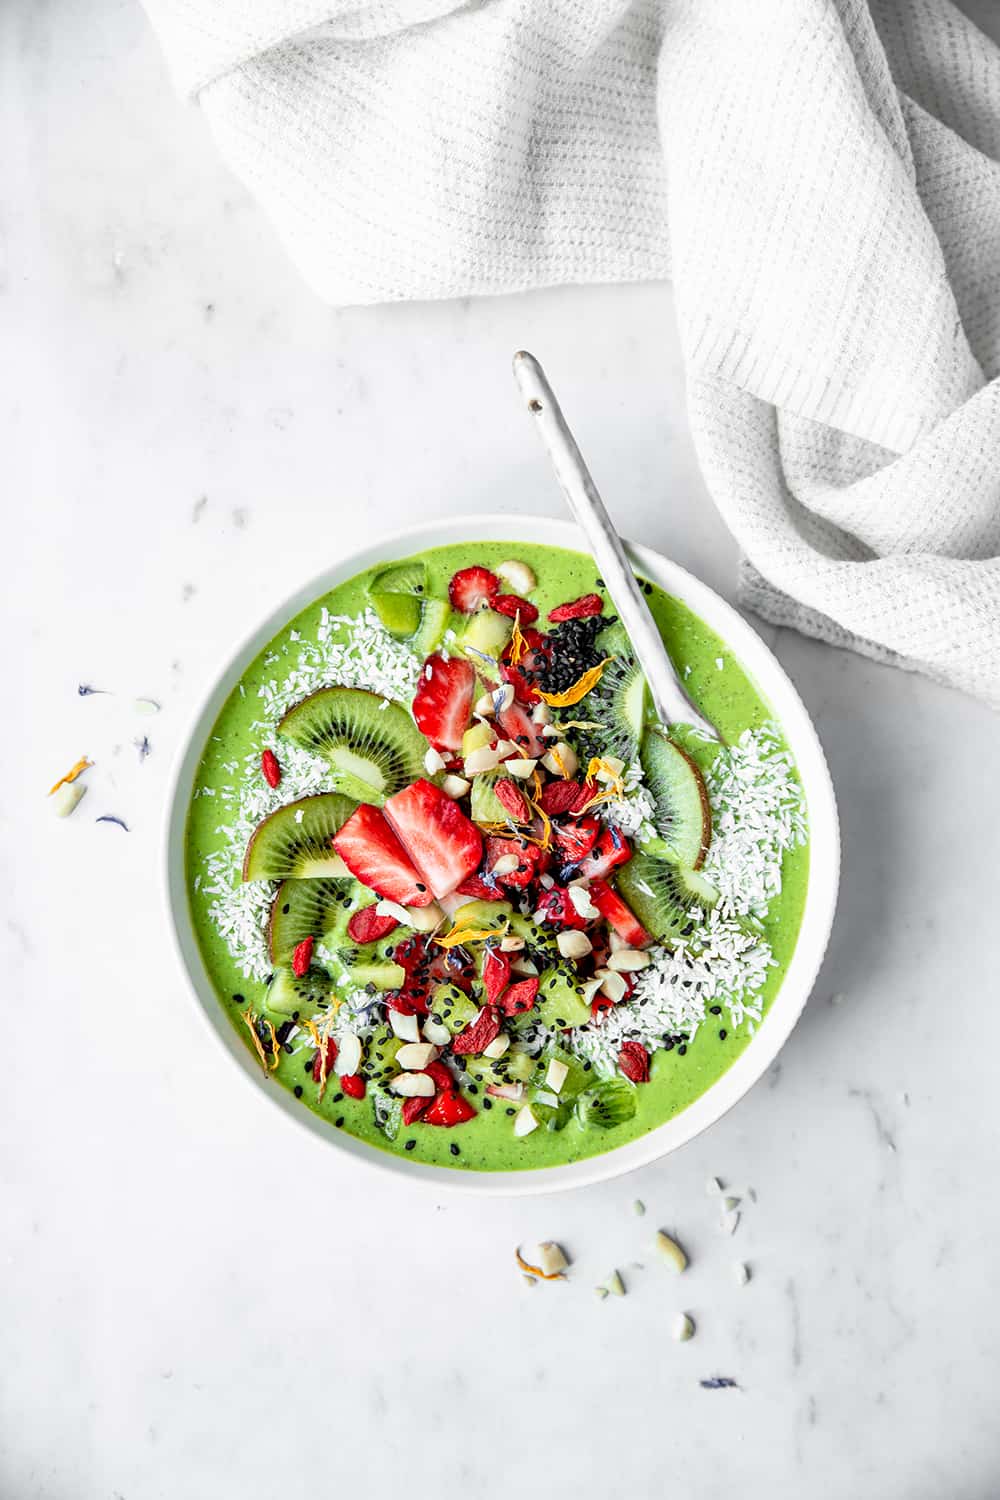 Bright Green Smoothie Bowl With Fruit On Top